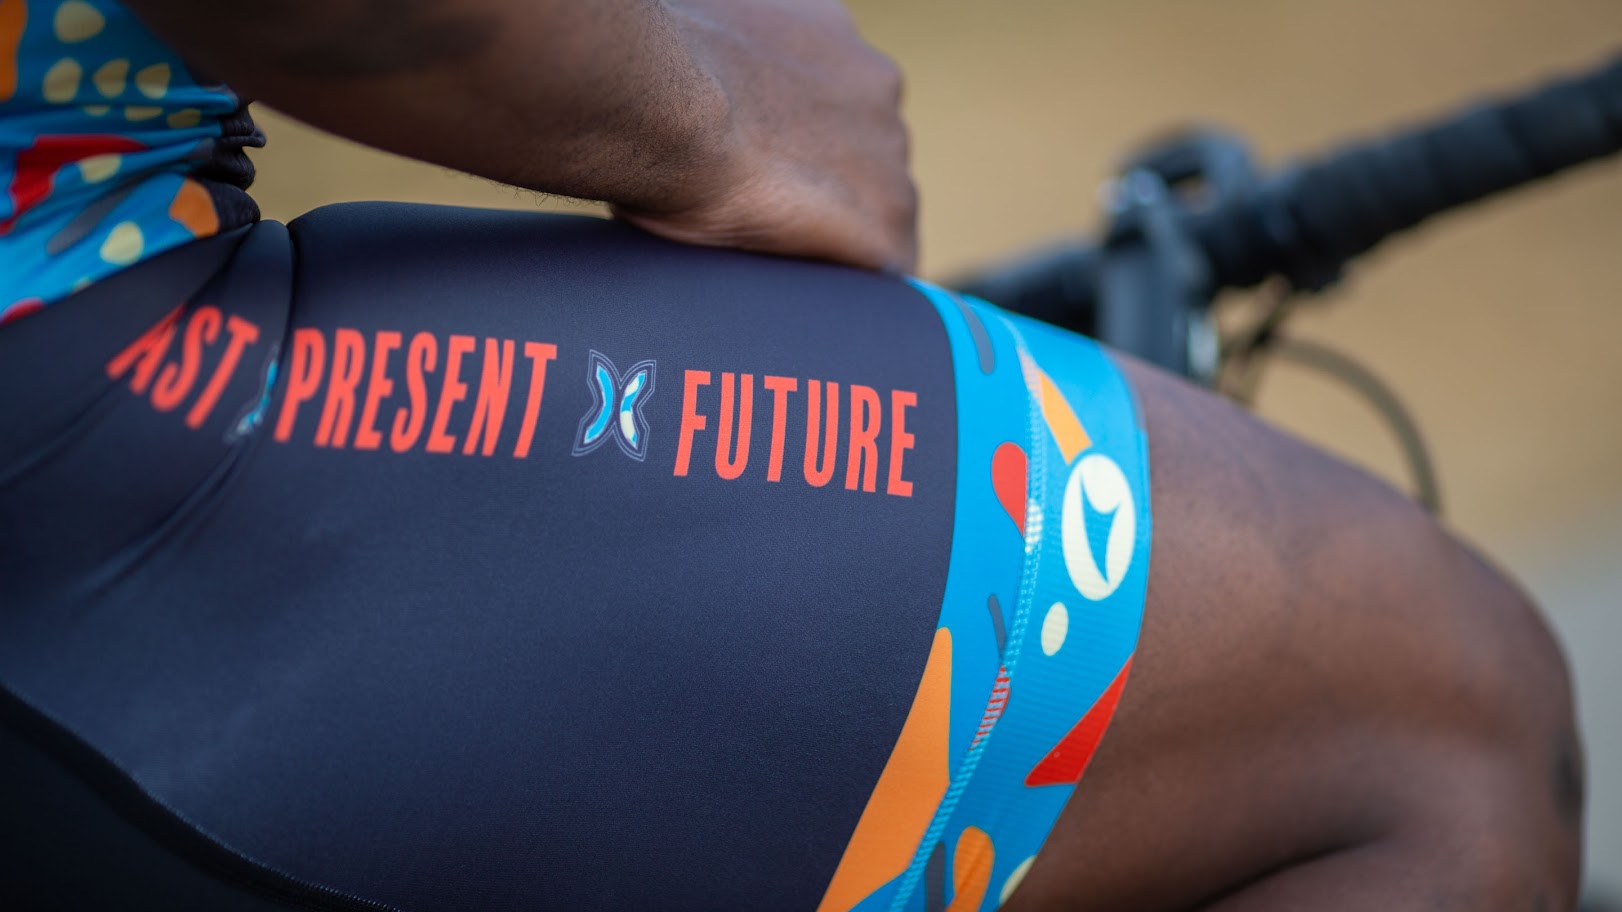 Bib Shorts - primalblends x Major Taylor Iron Riders - A collection of cycling clothing celebrating Black History Month - Past, Present and Future